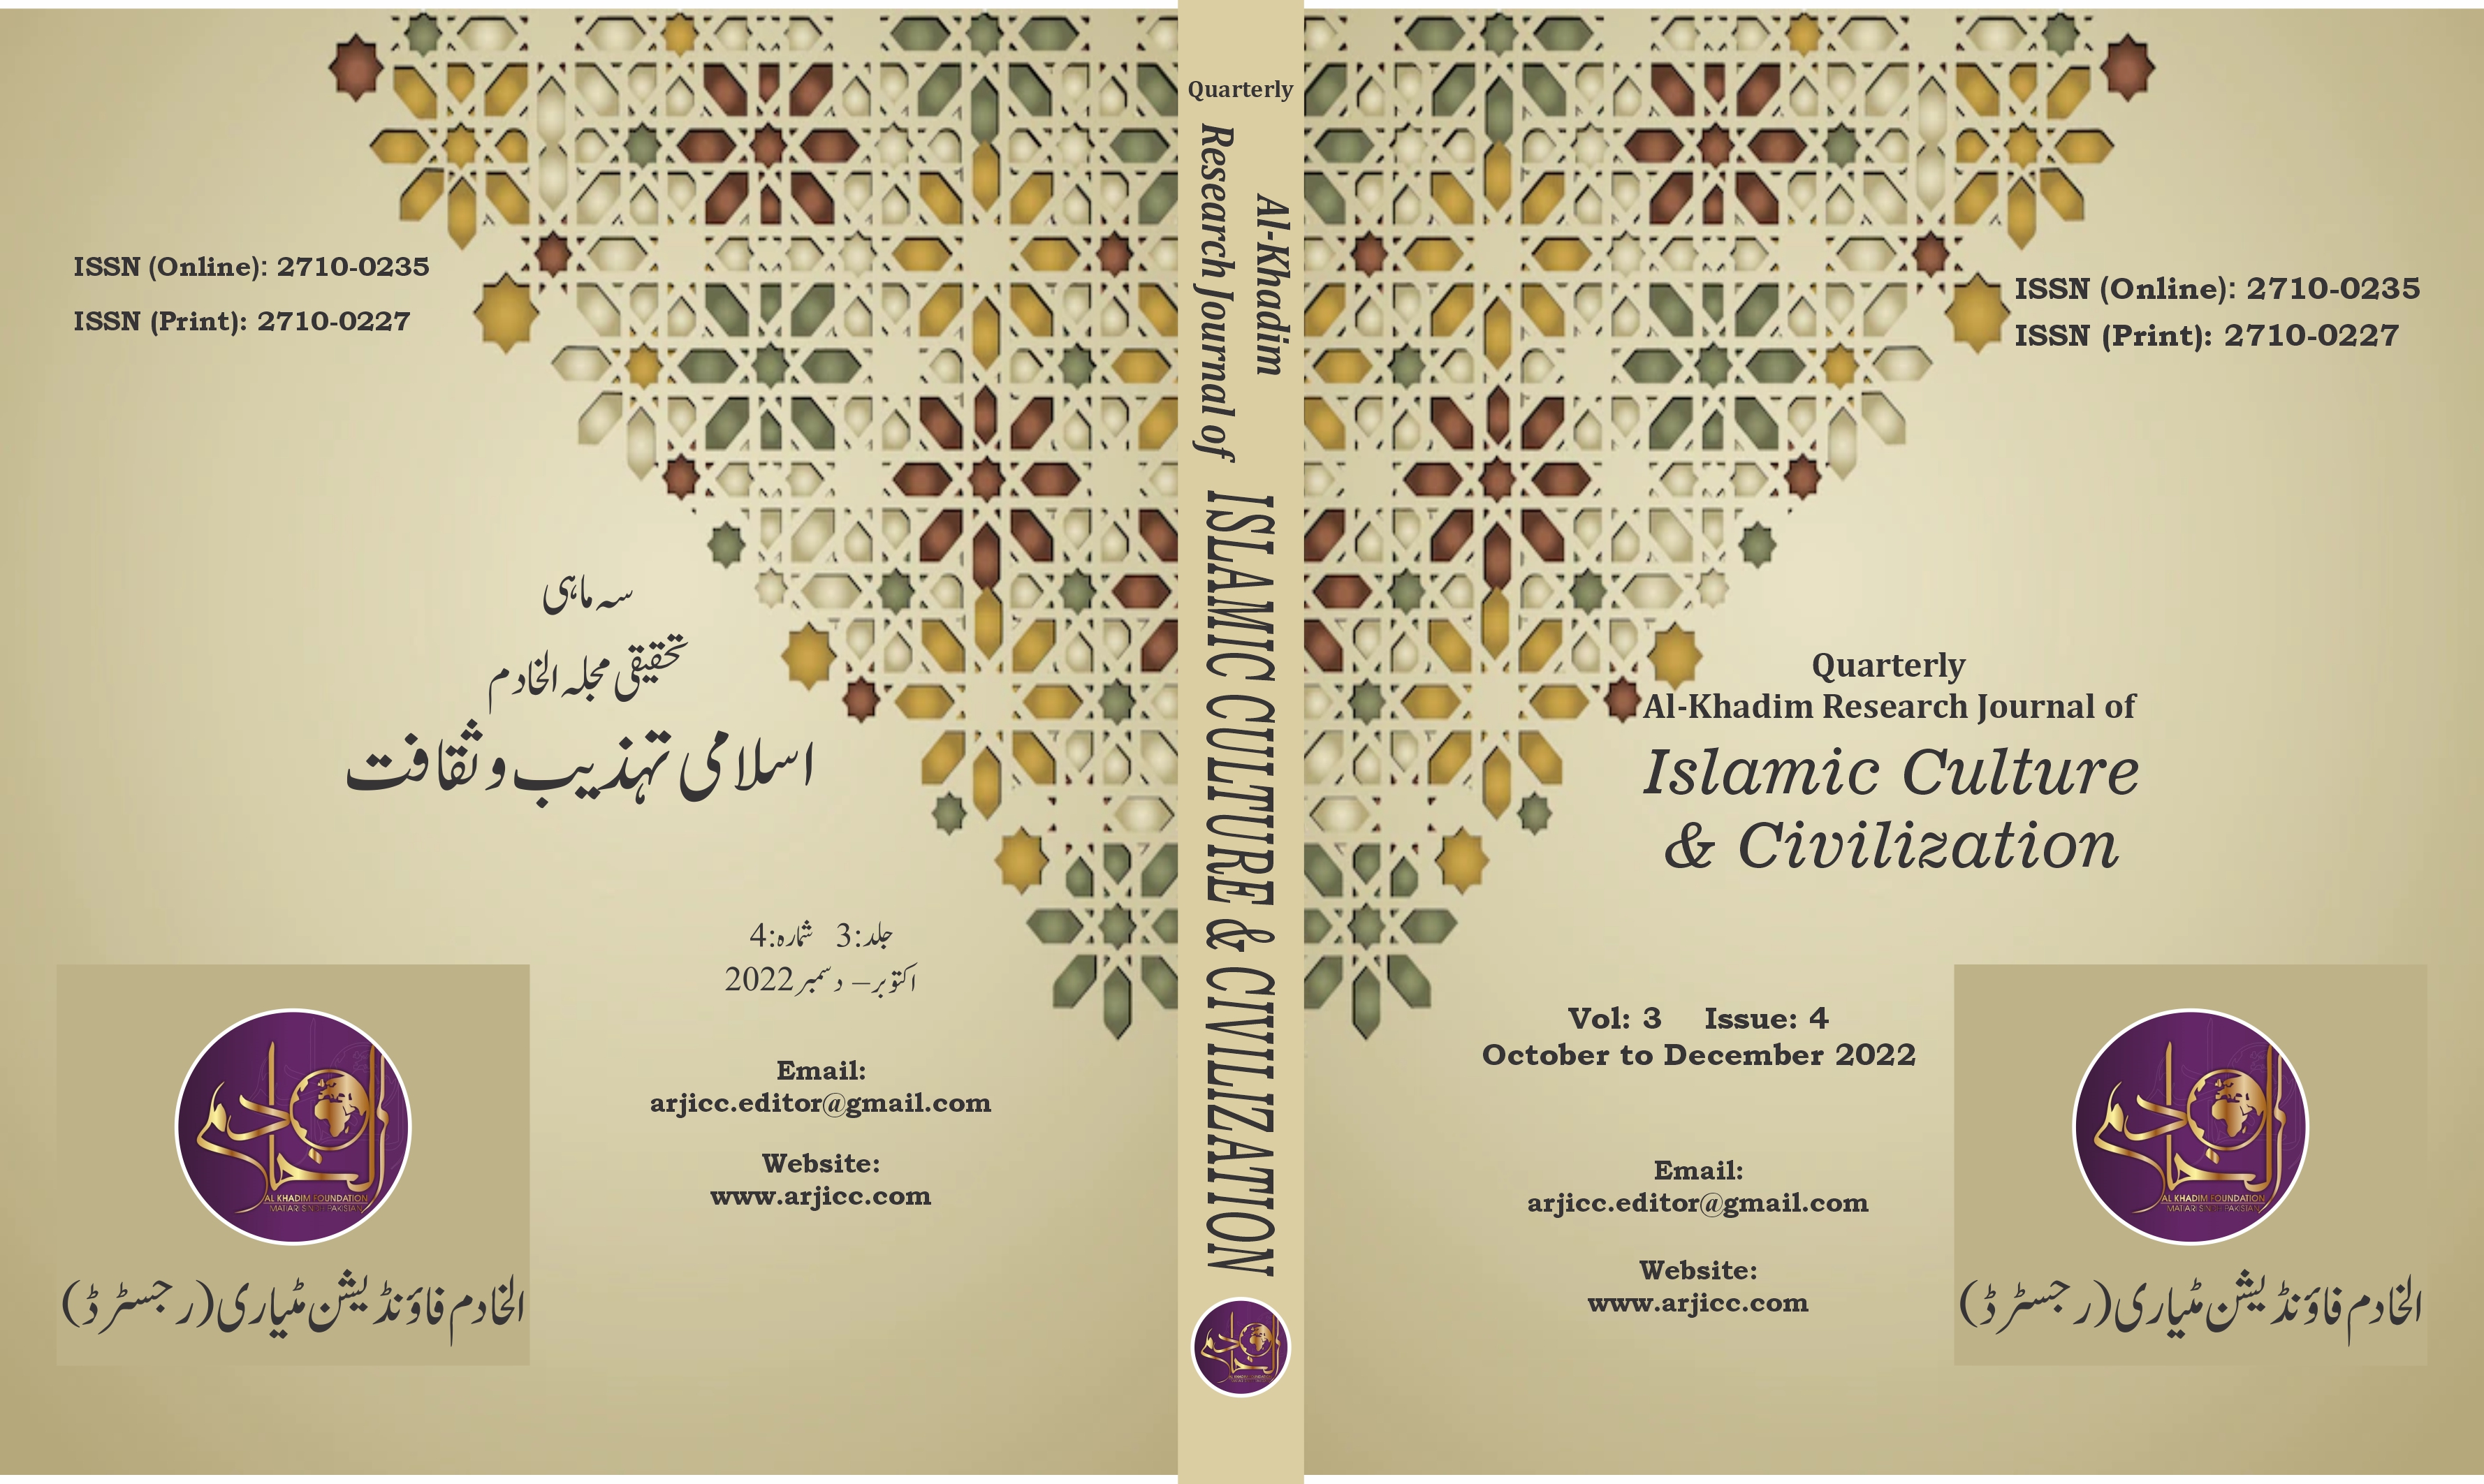 					View Vol. 3 No. 4 (2022): Al Khadim Research Journal of Islamic Culture and Civilization (October to December 2022)
				